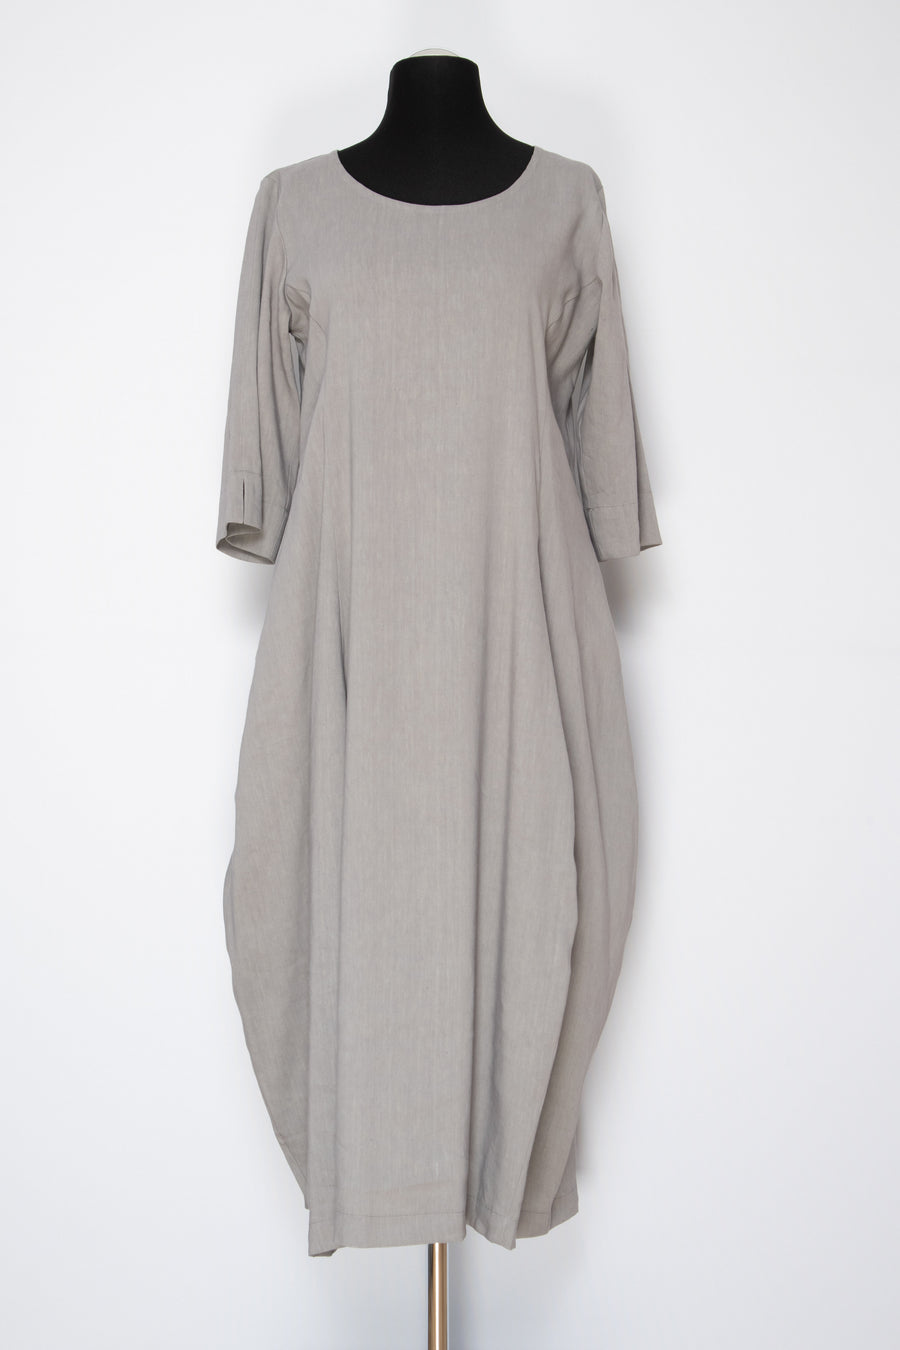 Dress in a linen/viscose blend with spandex (item no. 227k1)